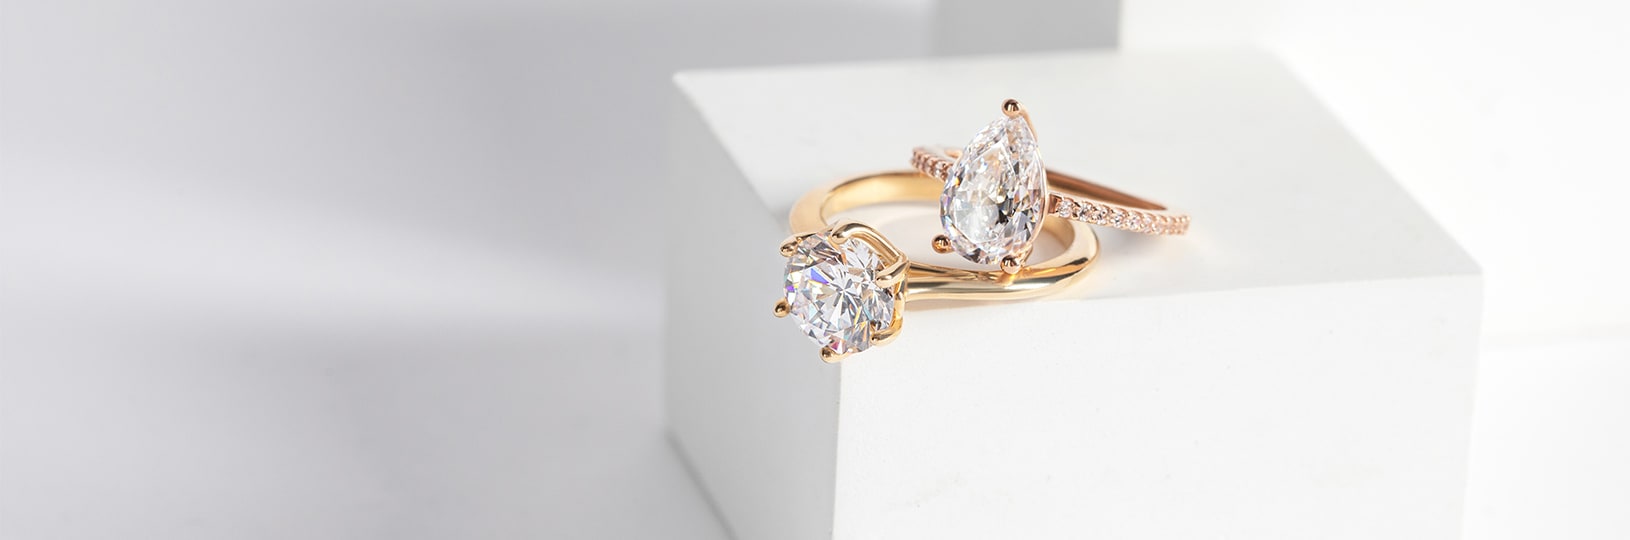 Two engagement rings compared side-by-side